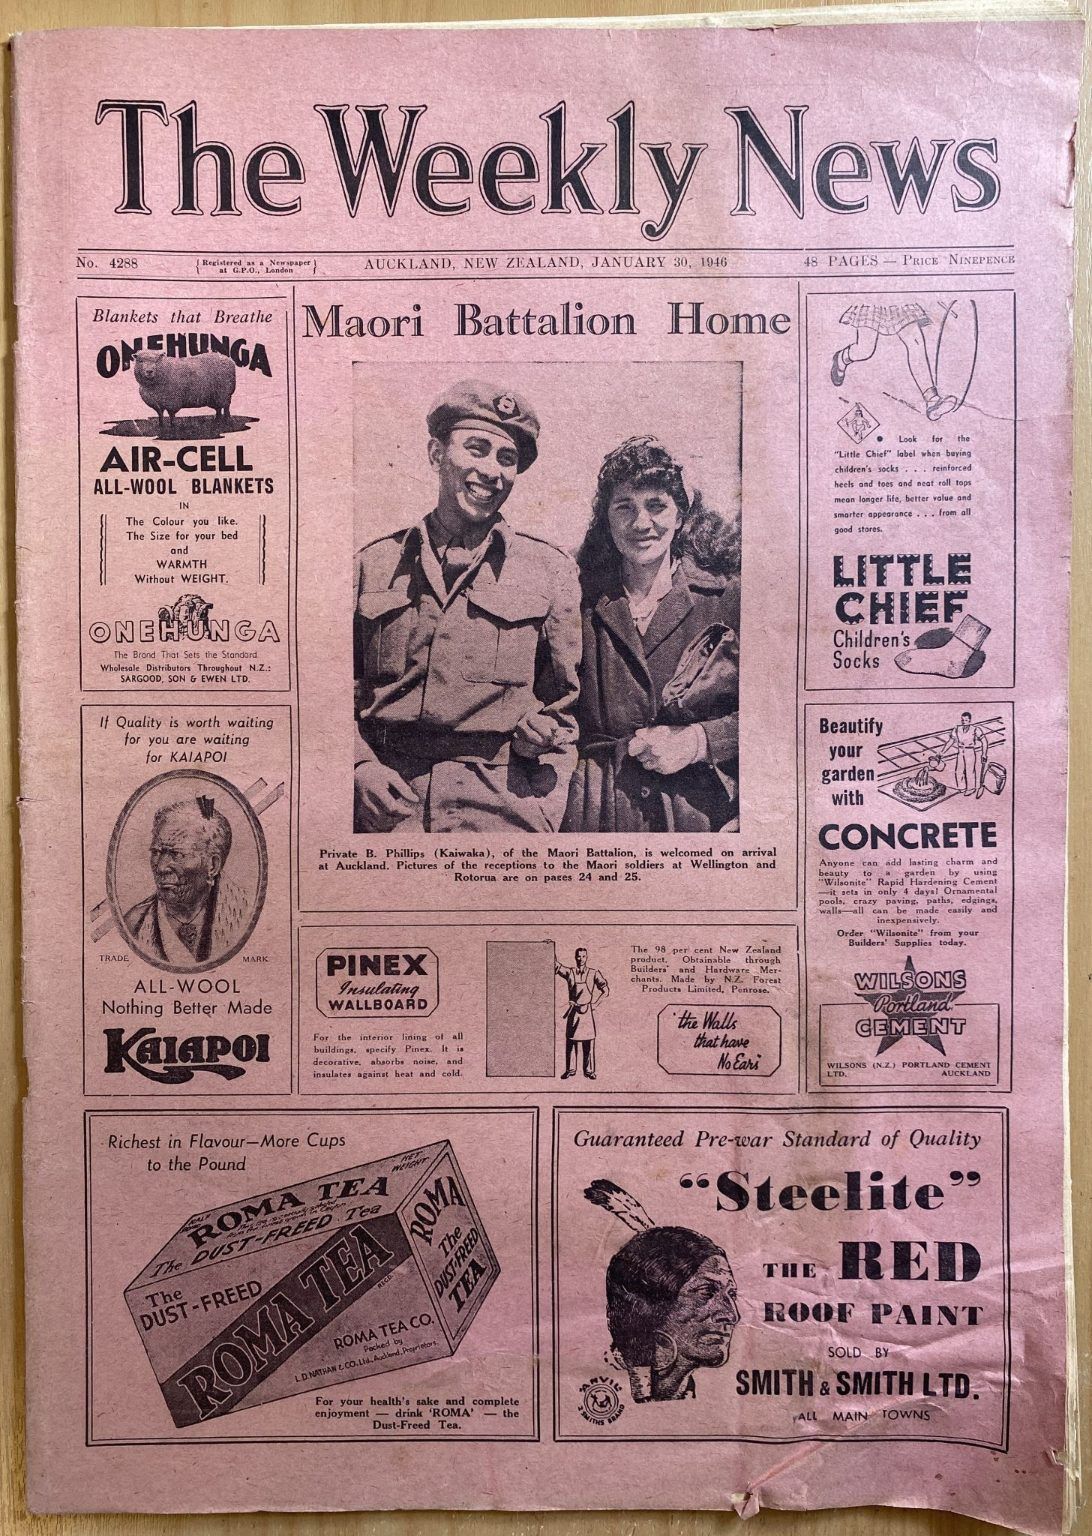 OLD NEWSPAPER: The Weekly News - No. 4288, 30 January 1946